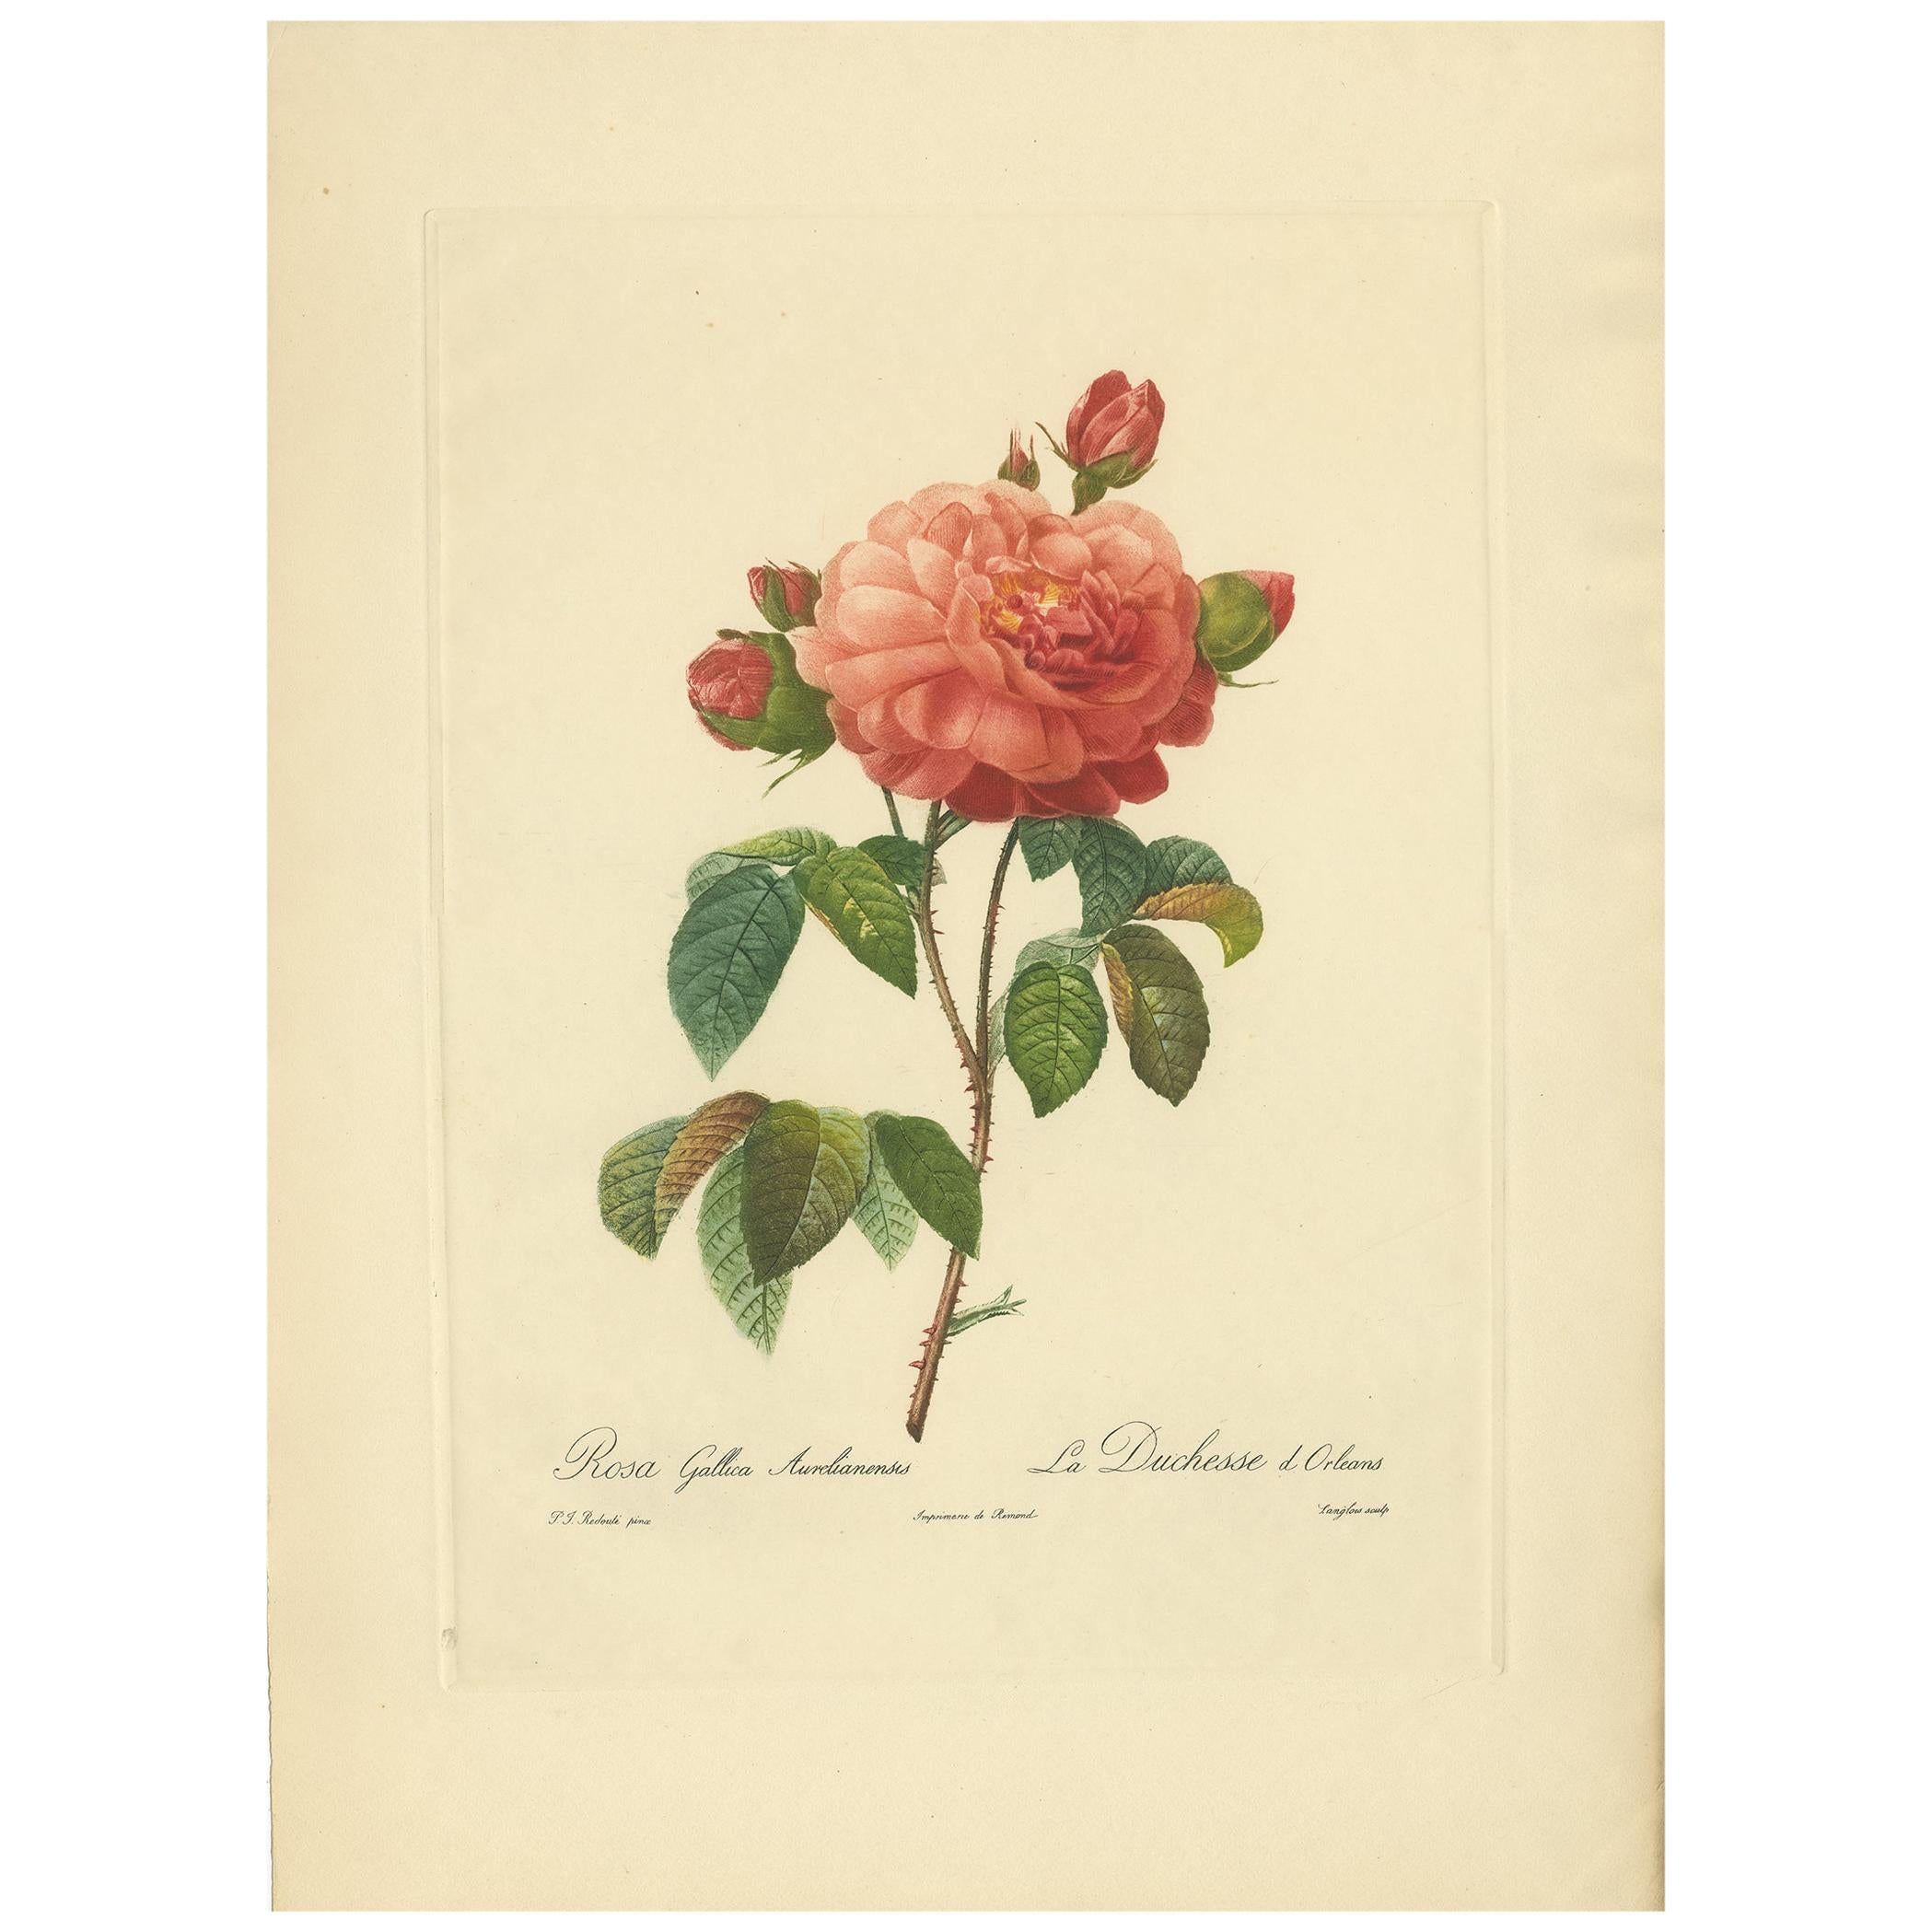 Antique Botany Print of a Rosa Gallica 'French rose' Made after P.J. Redouté